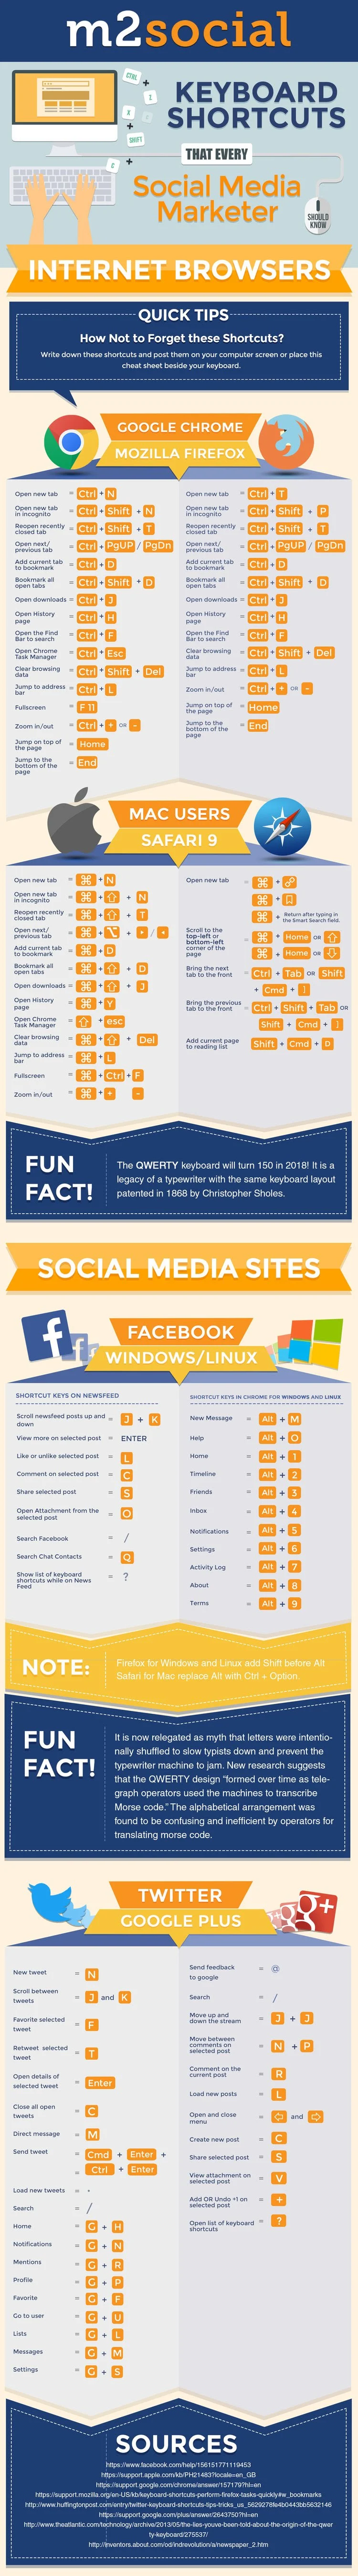 Keyboard Shortcuts that Every Social Media Marketer Should Know - #infographic